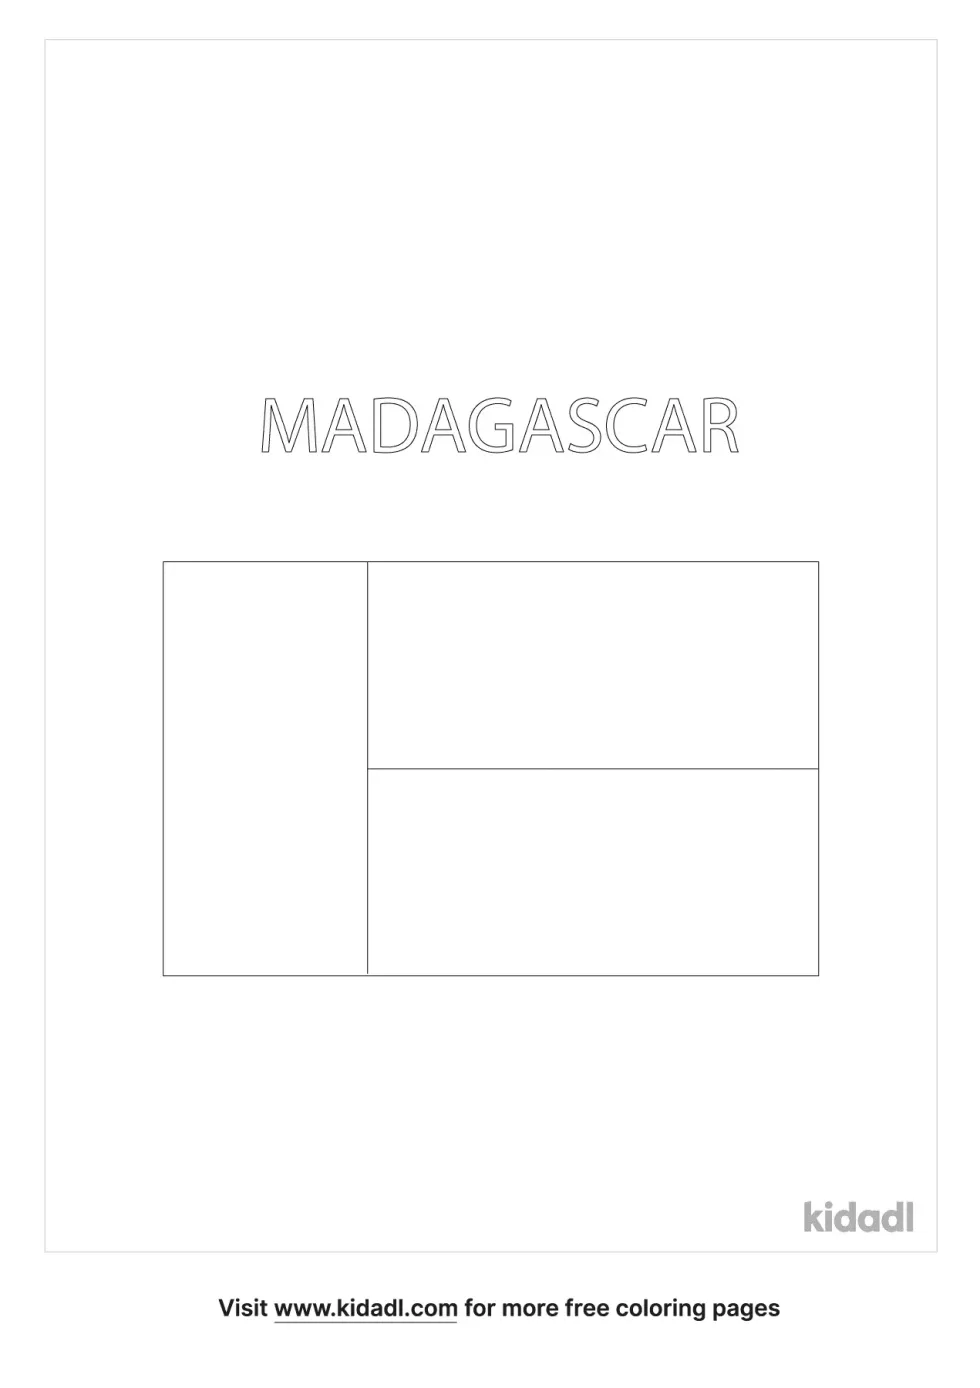 Madagascar Flag Coloring Page